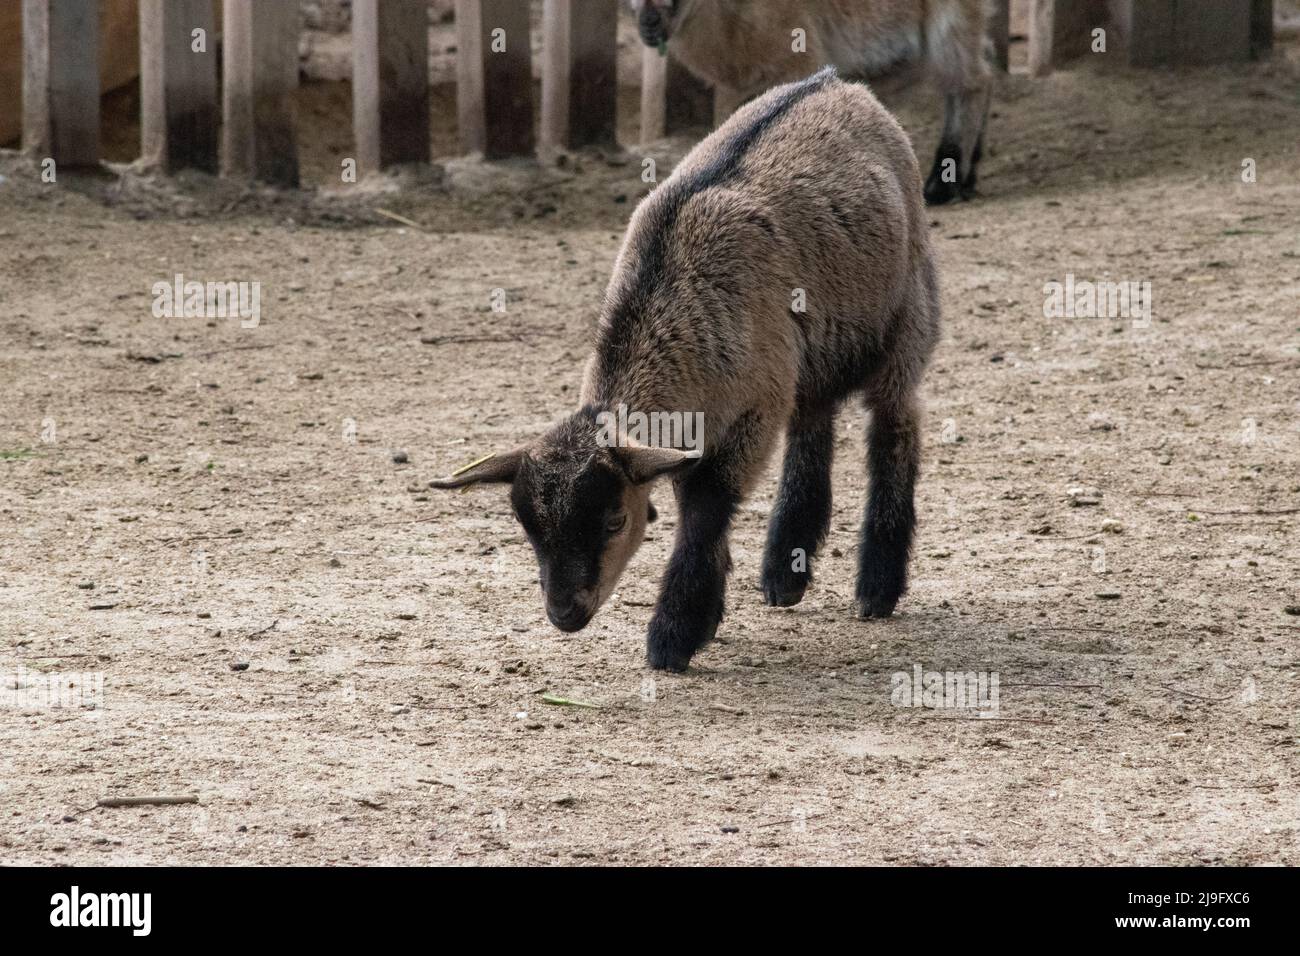 Young West African Dwarf goat. Budapest Zoo, Budapest, Hungary. Stock Photo